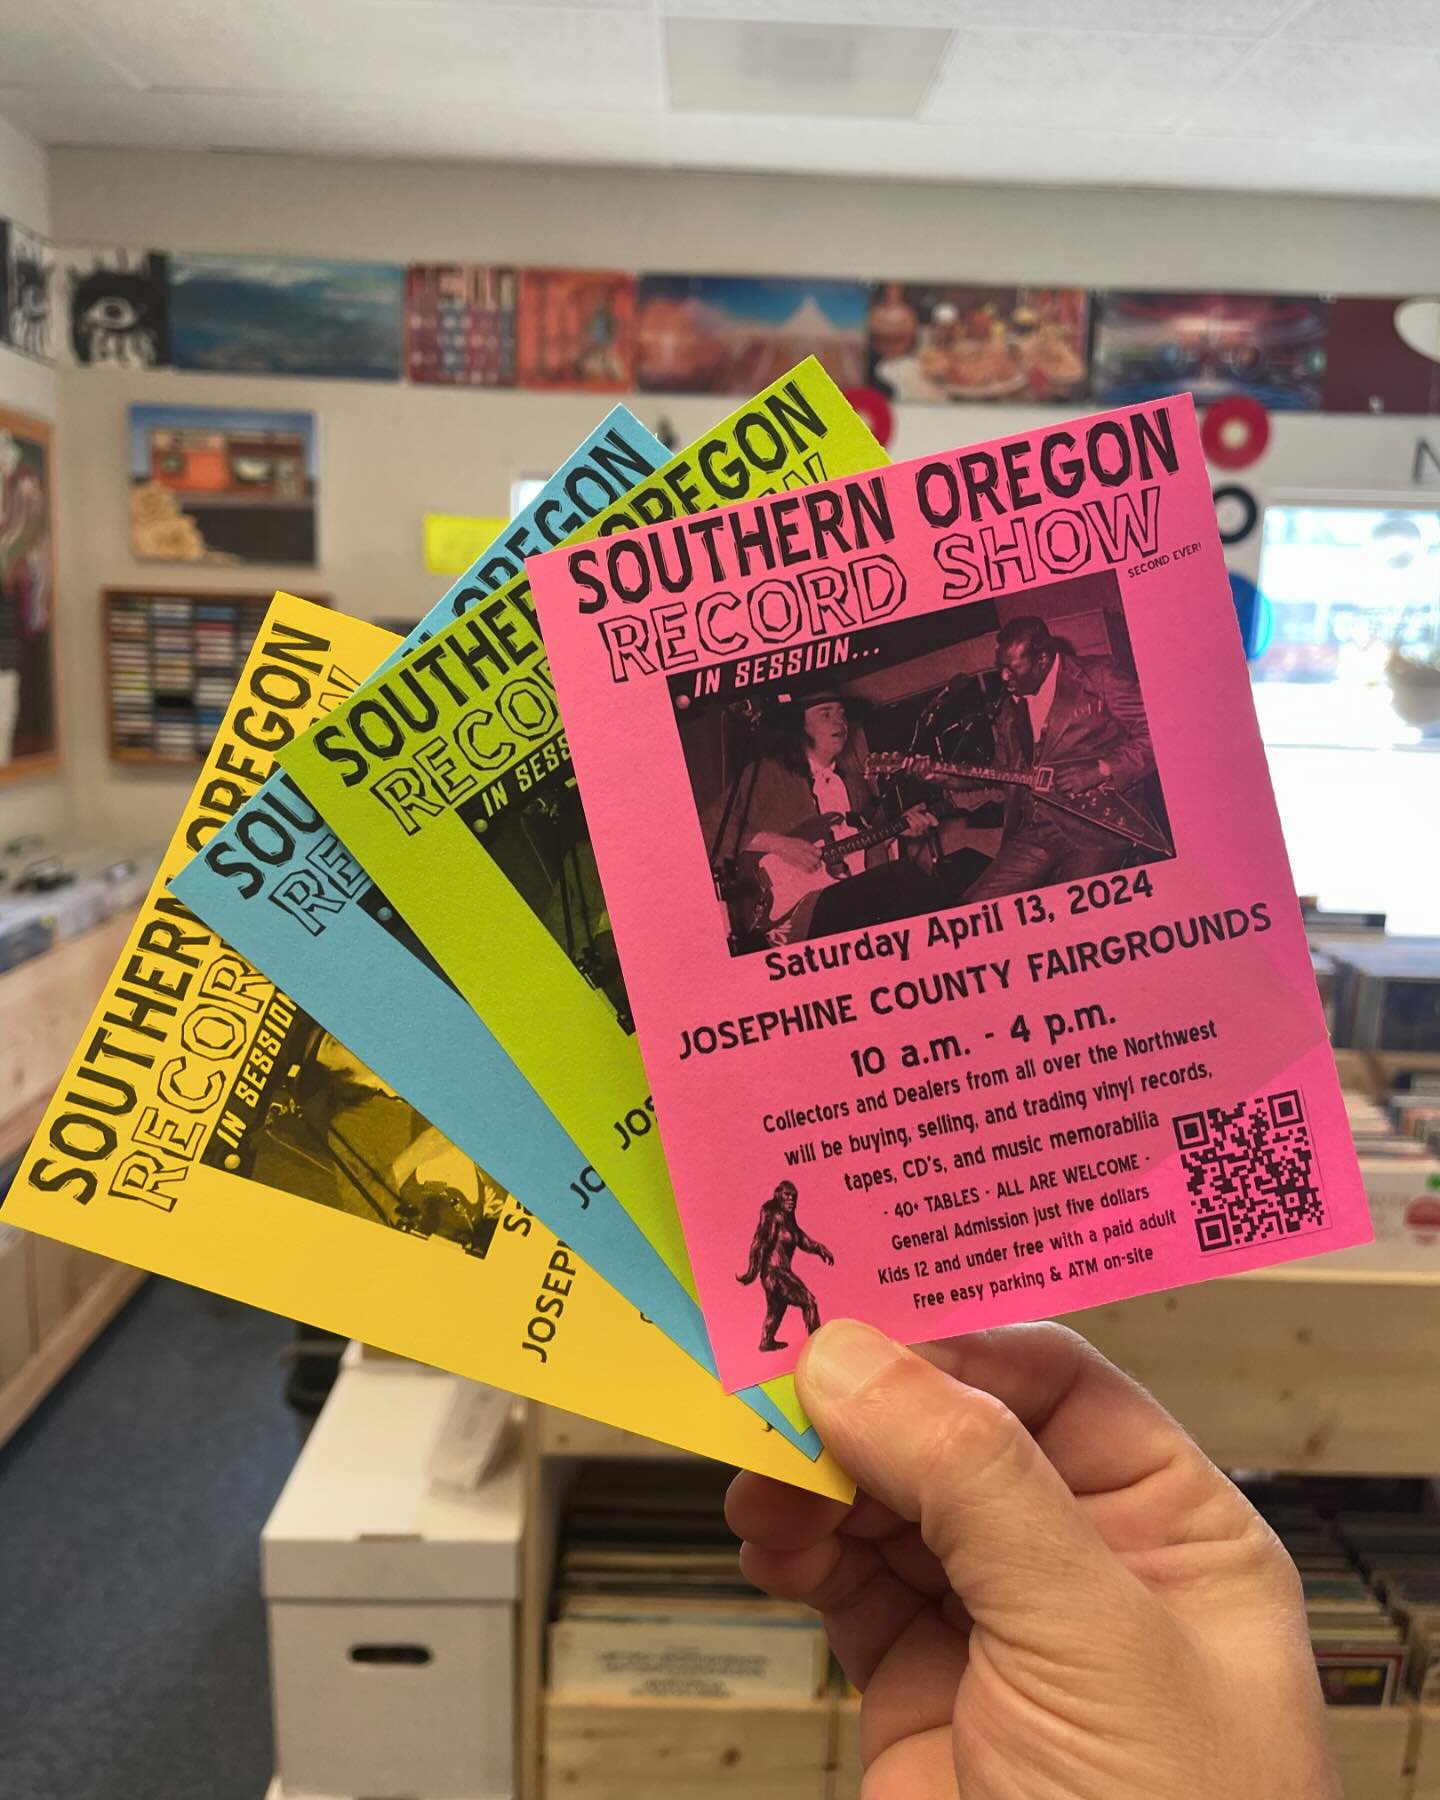 Gearing up for the Southern Oregon Record Show this Saturday! If you can&rsquo;t make it out to Grants Pass the shop will be open regular hours with Kat and Biscuits working the counter. Shop open noon to 6 PM Wednesday through Saturday. 

#supportyo